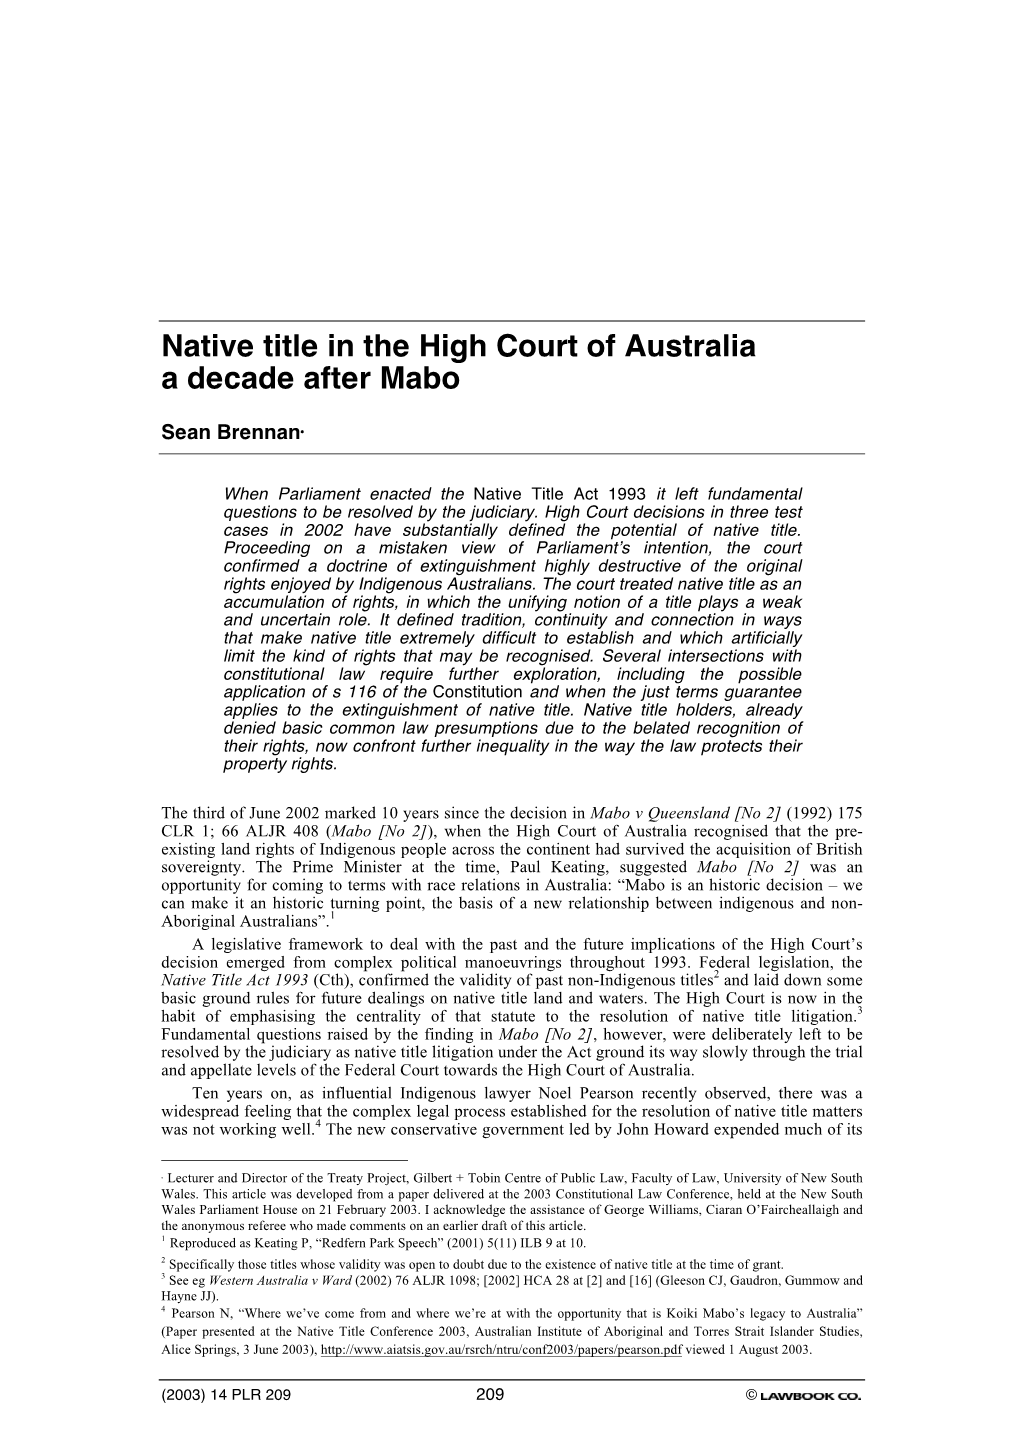 Native Title in the High Court of Australia a Decade After Mabo